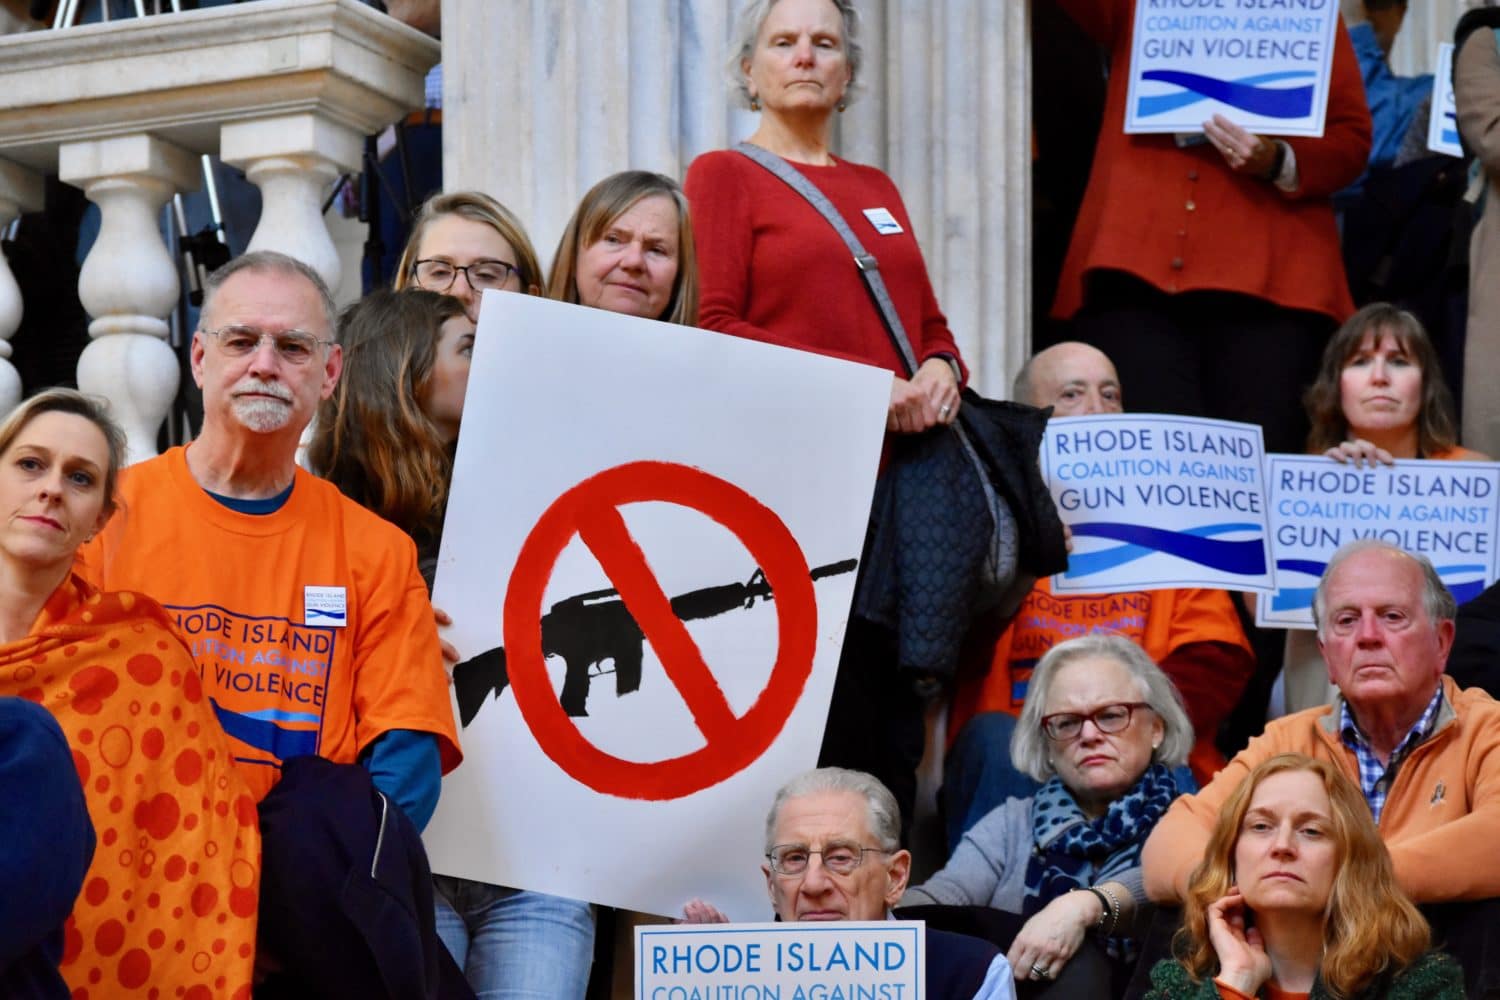 Assault weapon ban introduced in Rhode Island, high school students speak in support